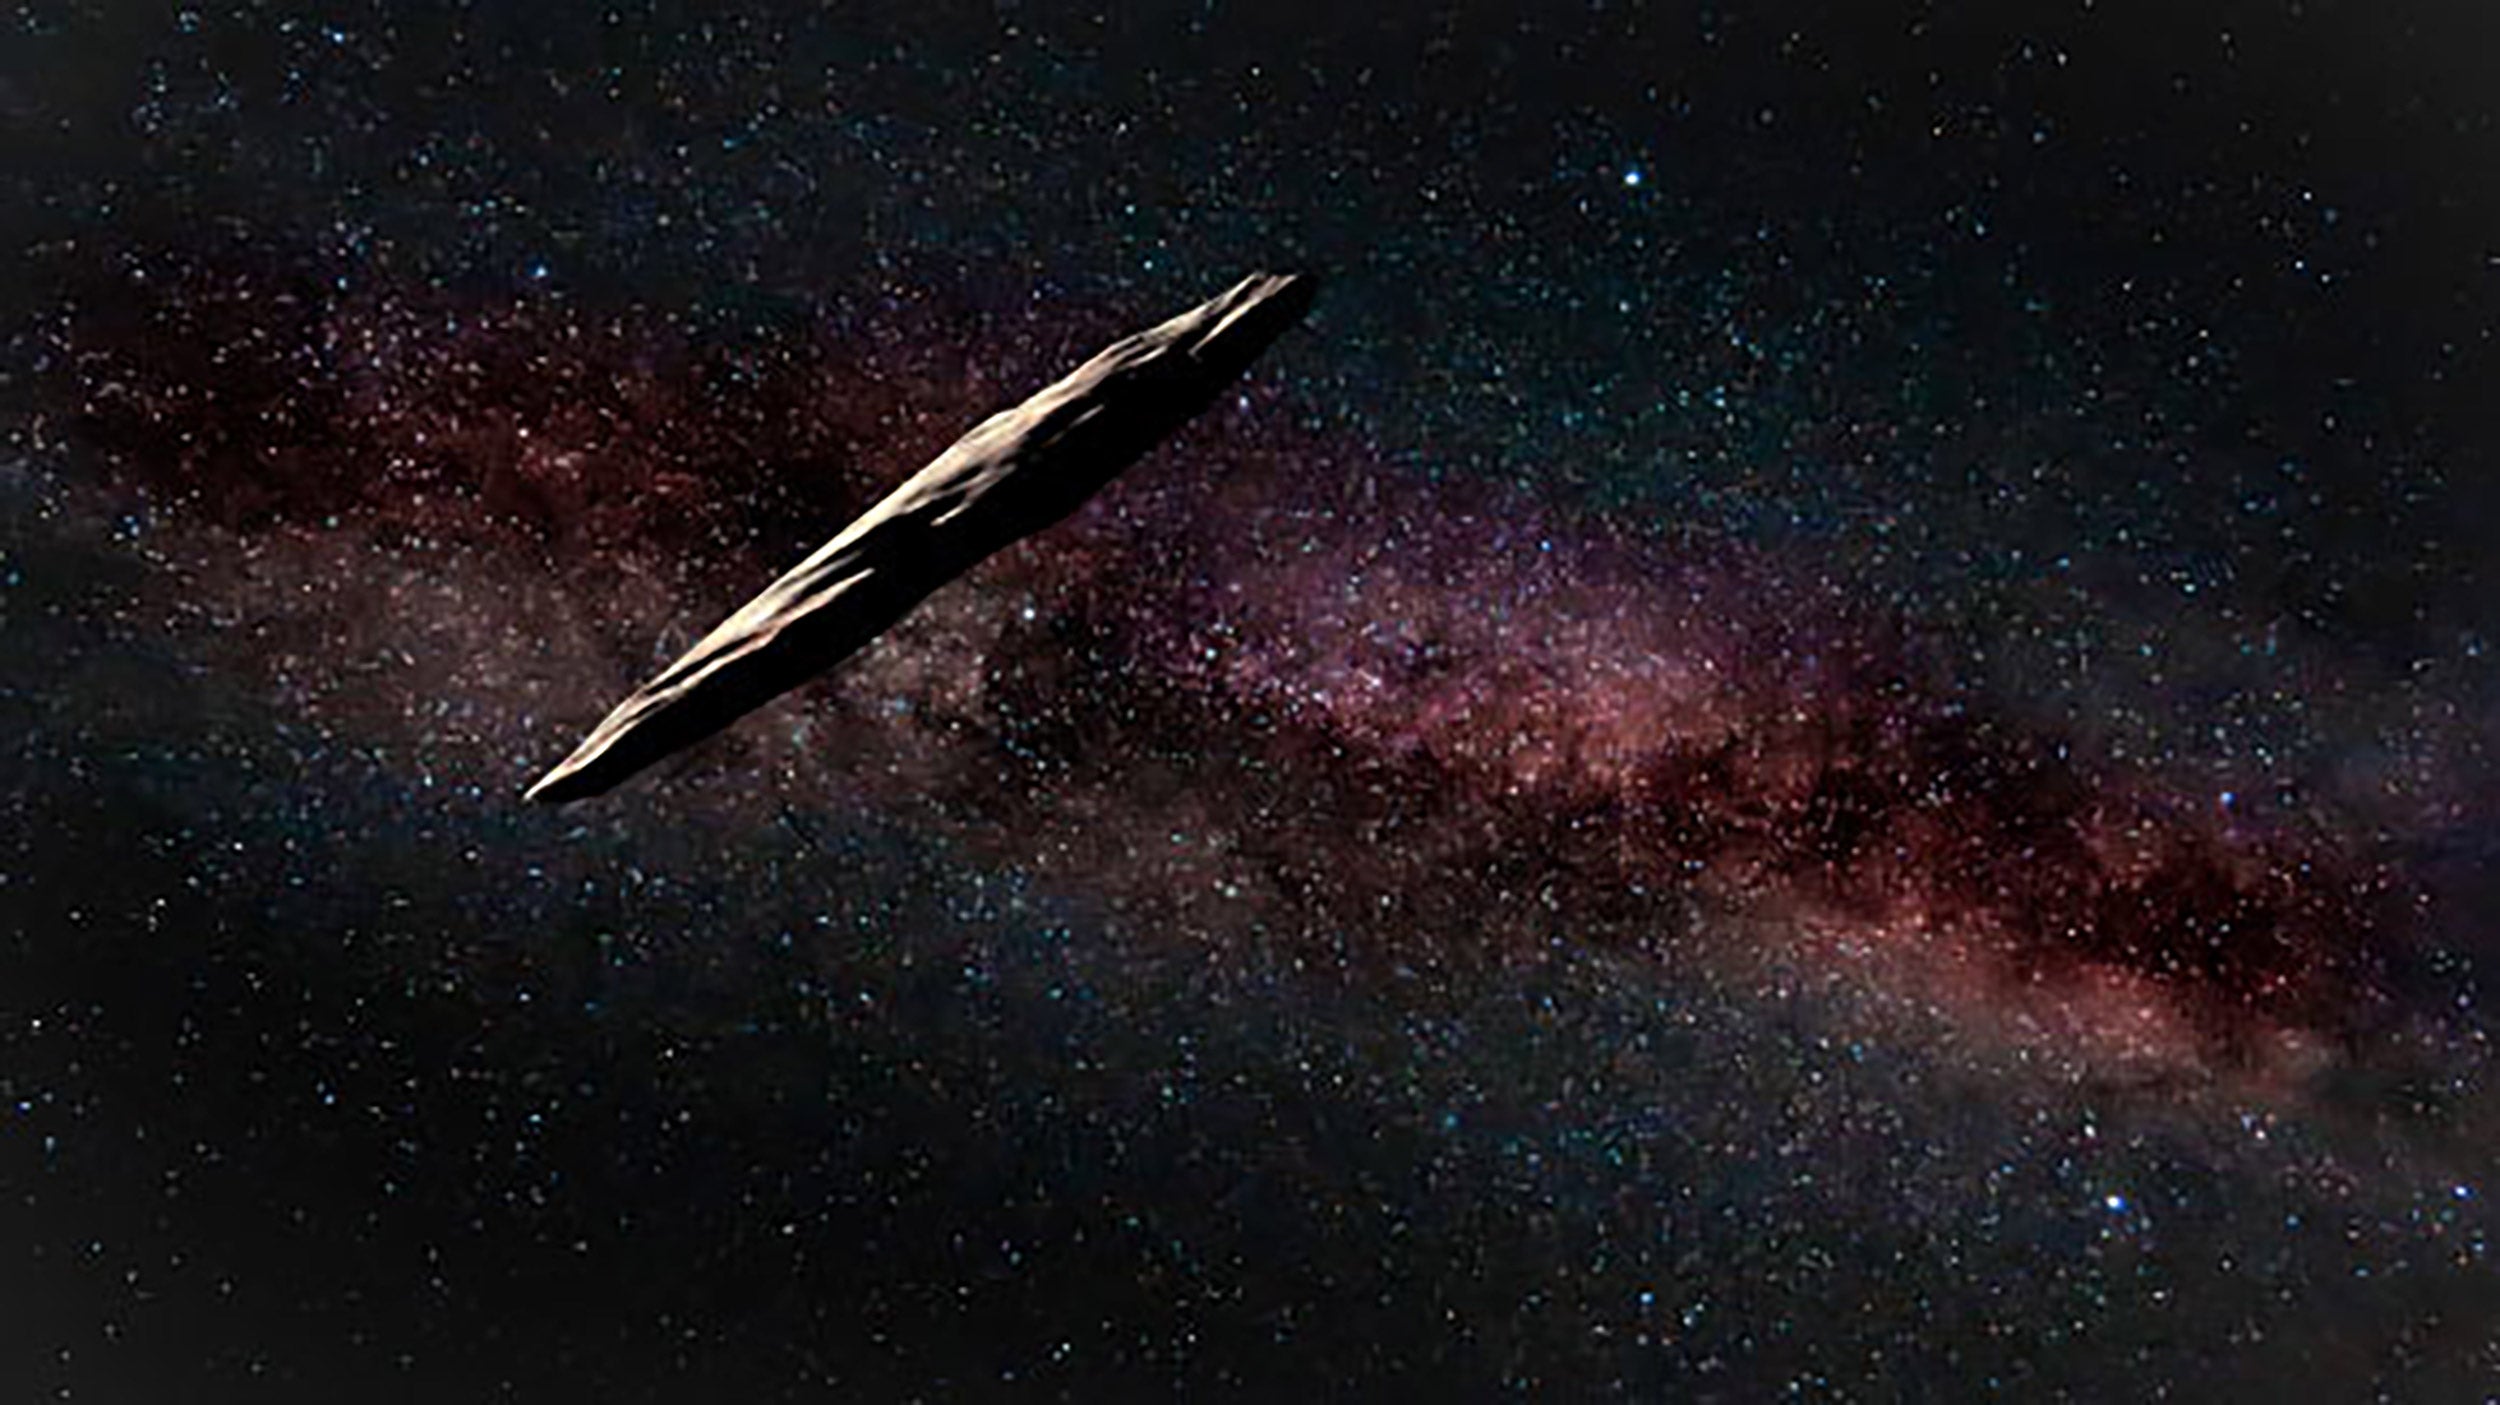 An artist's rendering of 'Oumuamua, a visitor from outside the solar system.